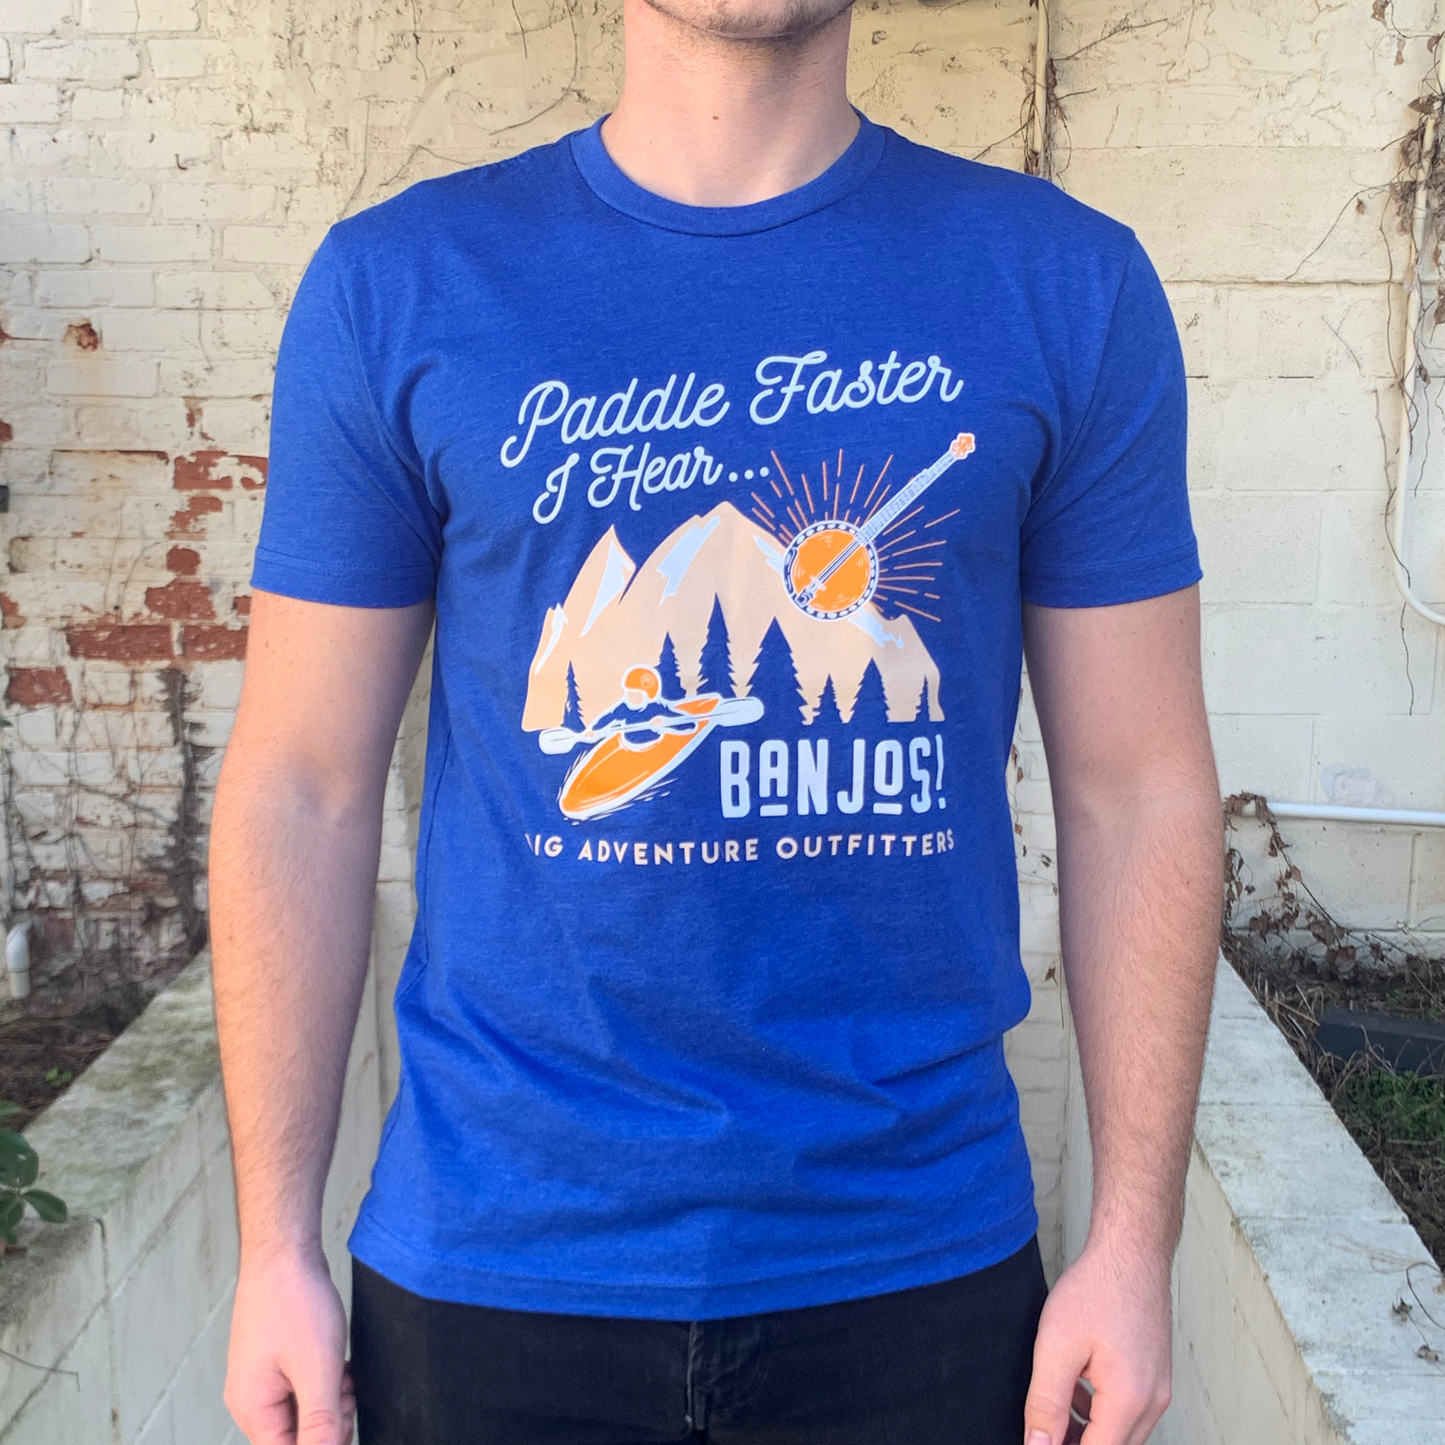 Paddle Faster Tee